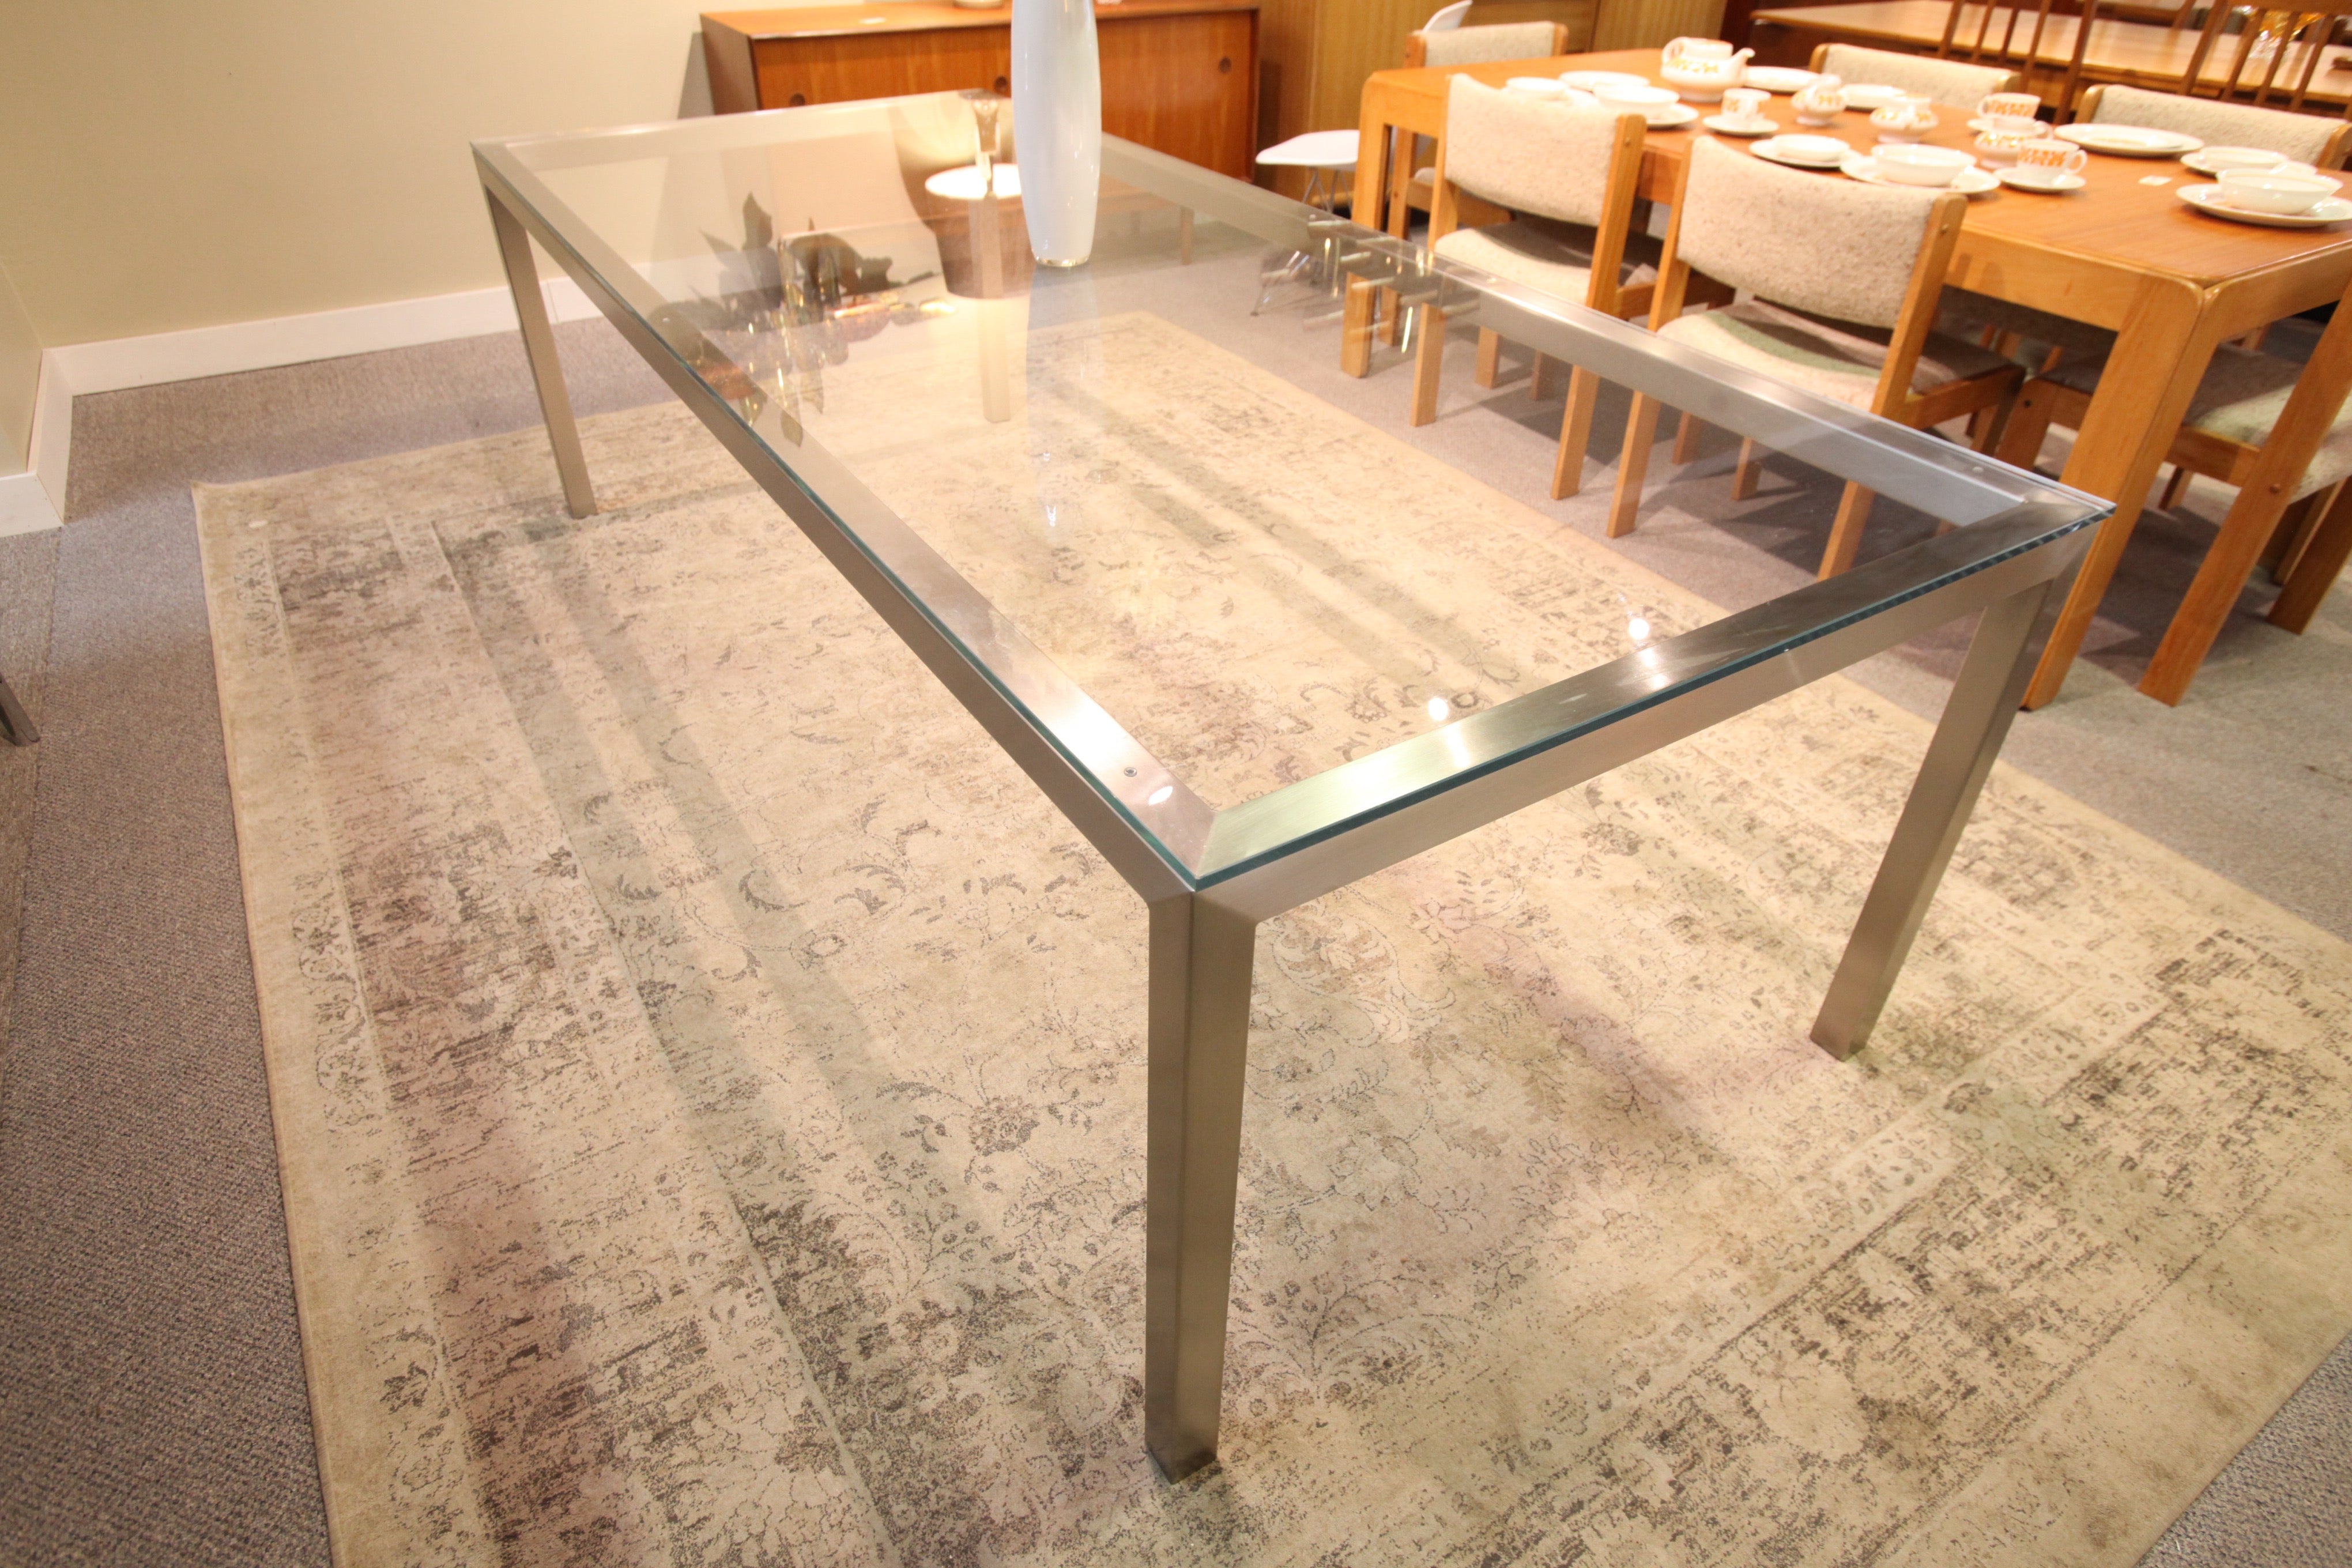 Trica Cubo Glass Table w/brushed steel base (94"L x 40")